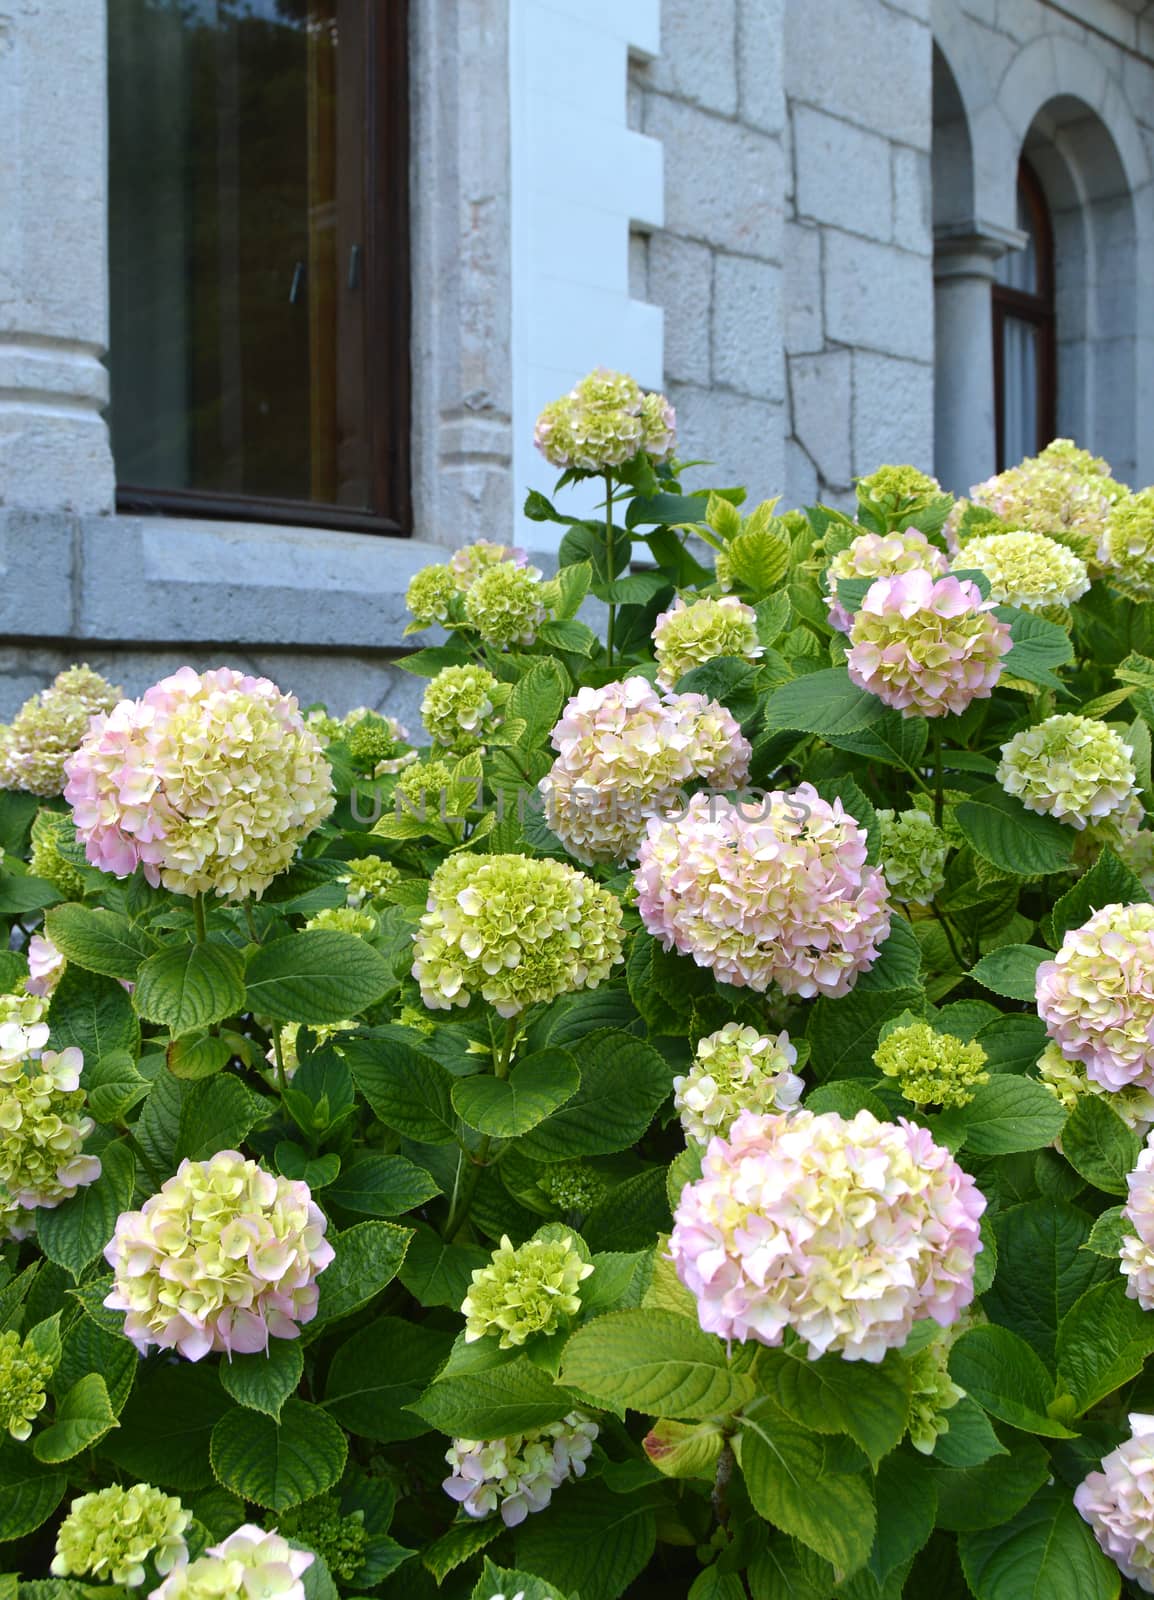 White hydrangea Bush blooms under the arched Windows of an old stone house in a romantic vintage style.